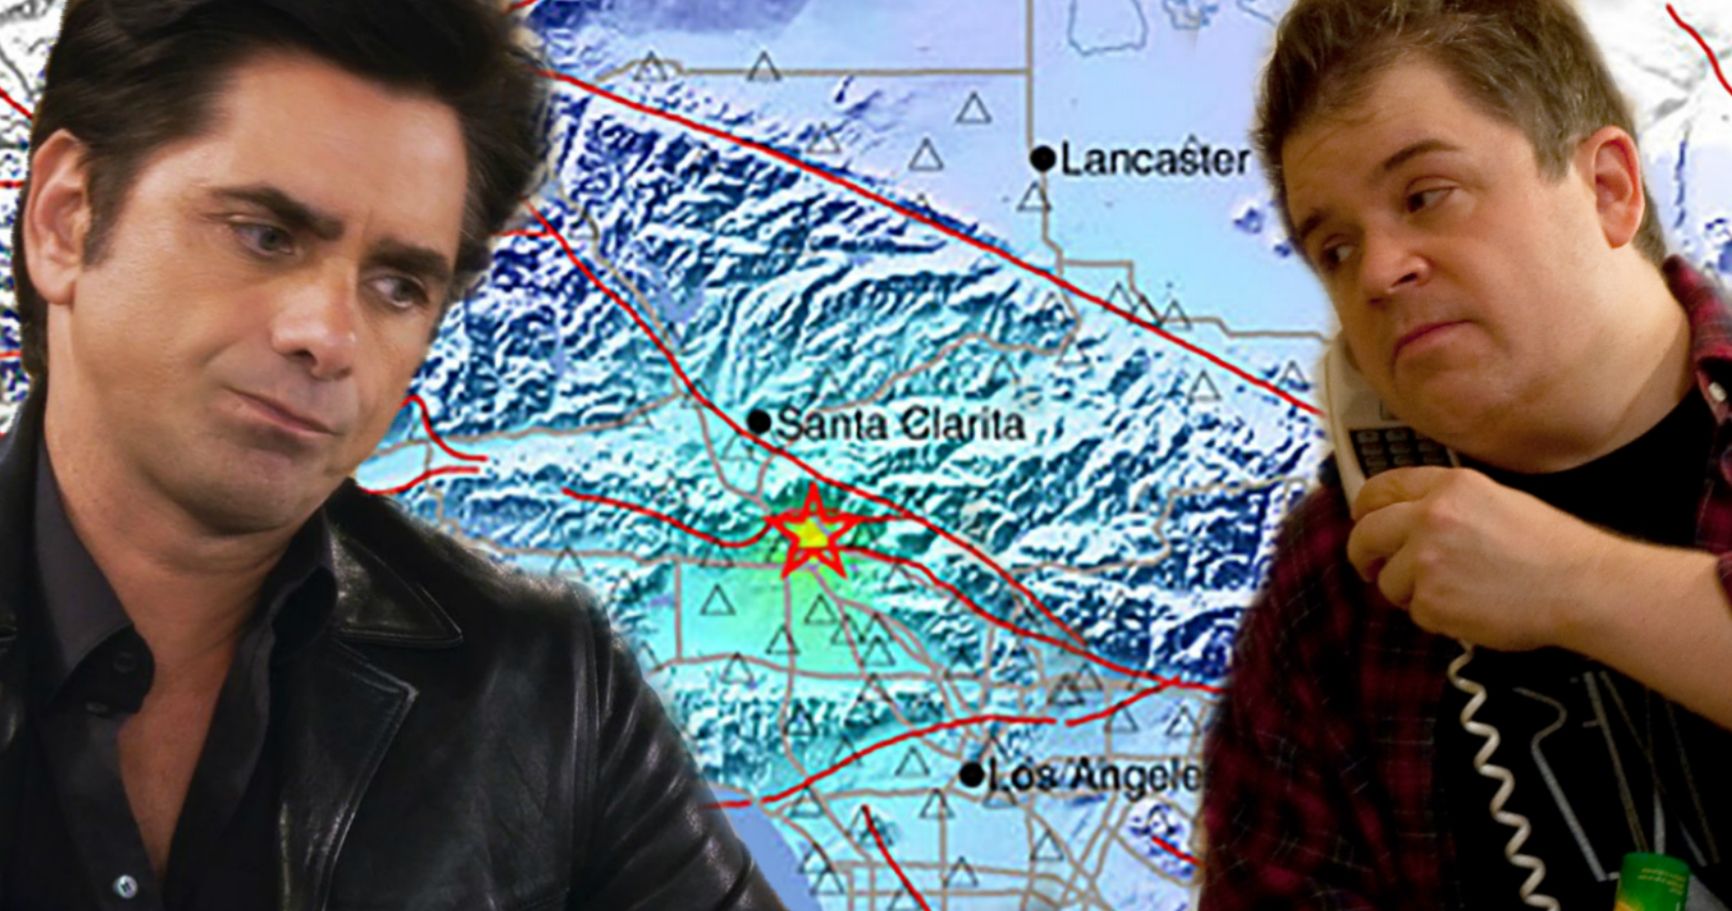 California Earthquake Left Celebrities All Shook Up on Twitter This Morning